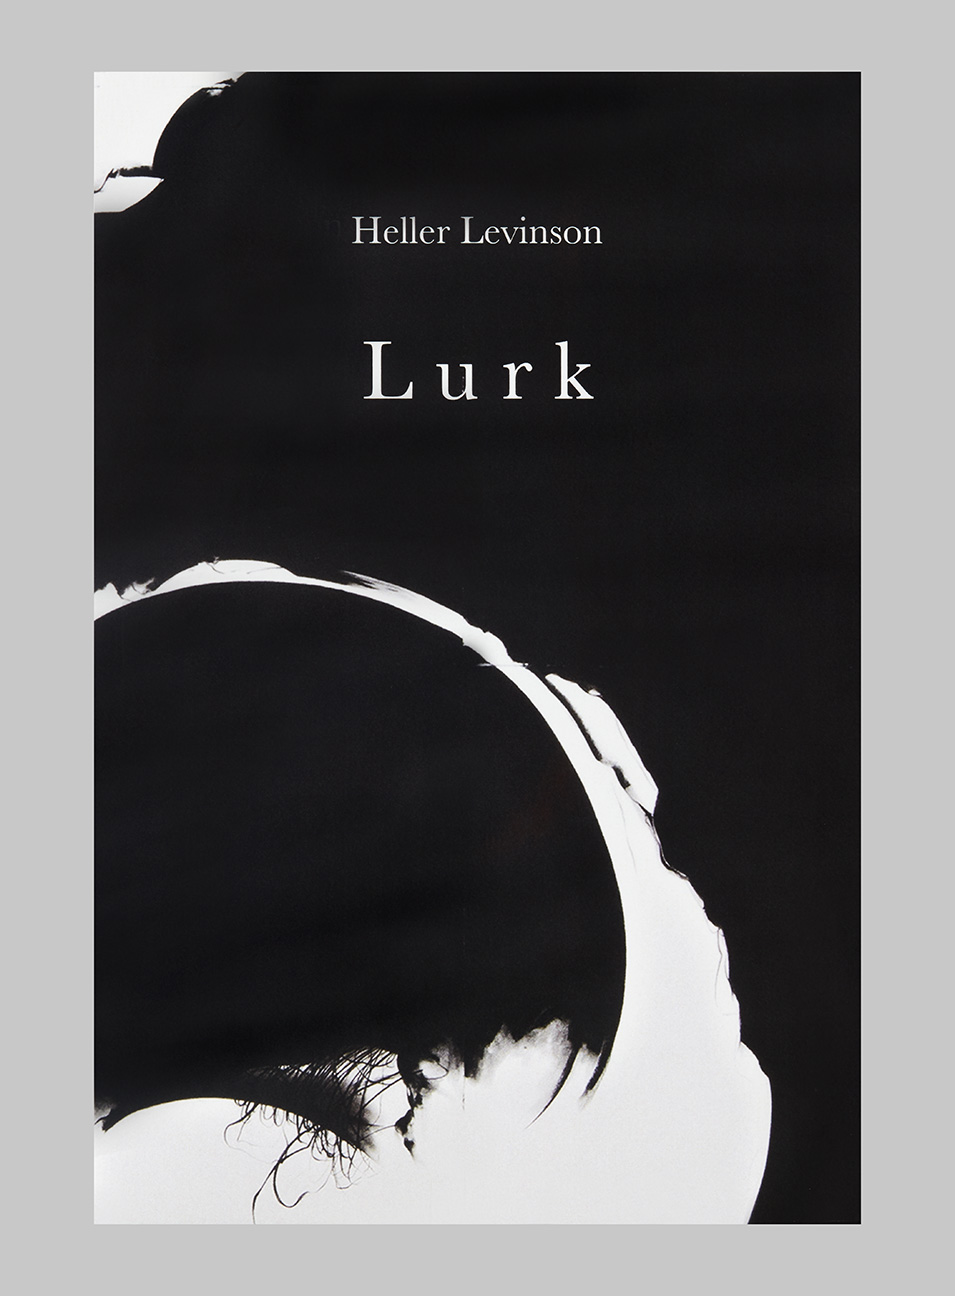 Lurk, Poems by Heller Levinson, cover art and design by Linda Lynch, 2021, Black Widow Press 